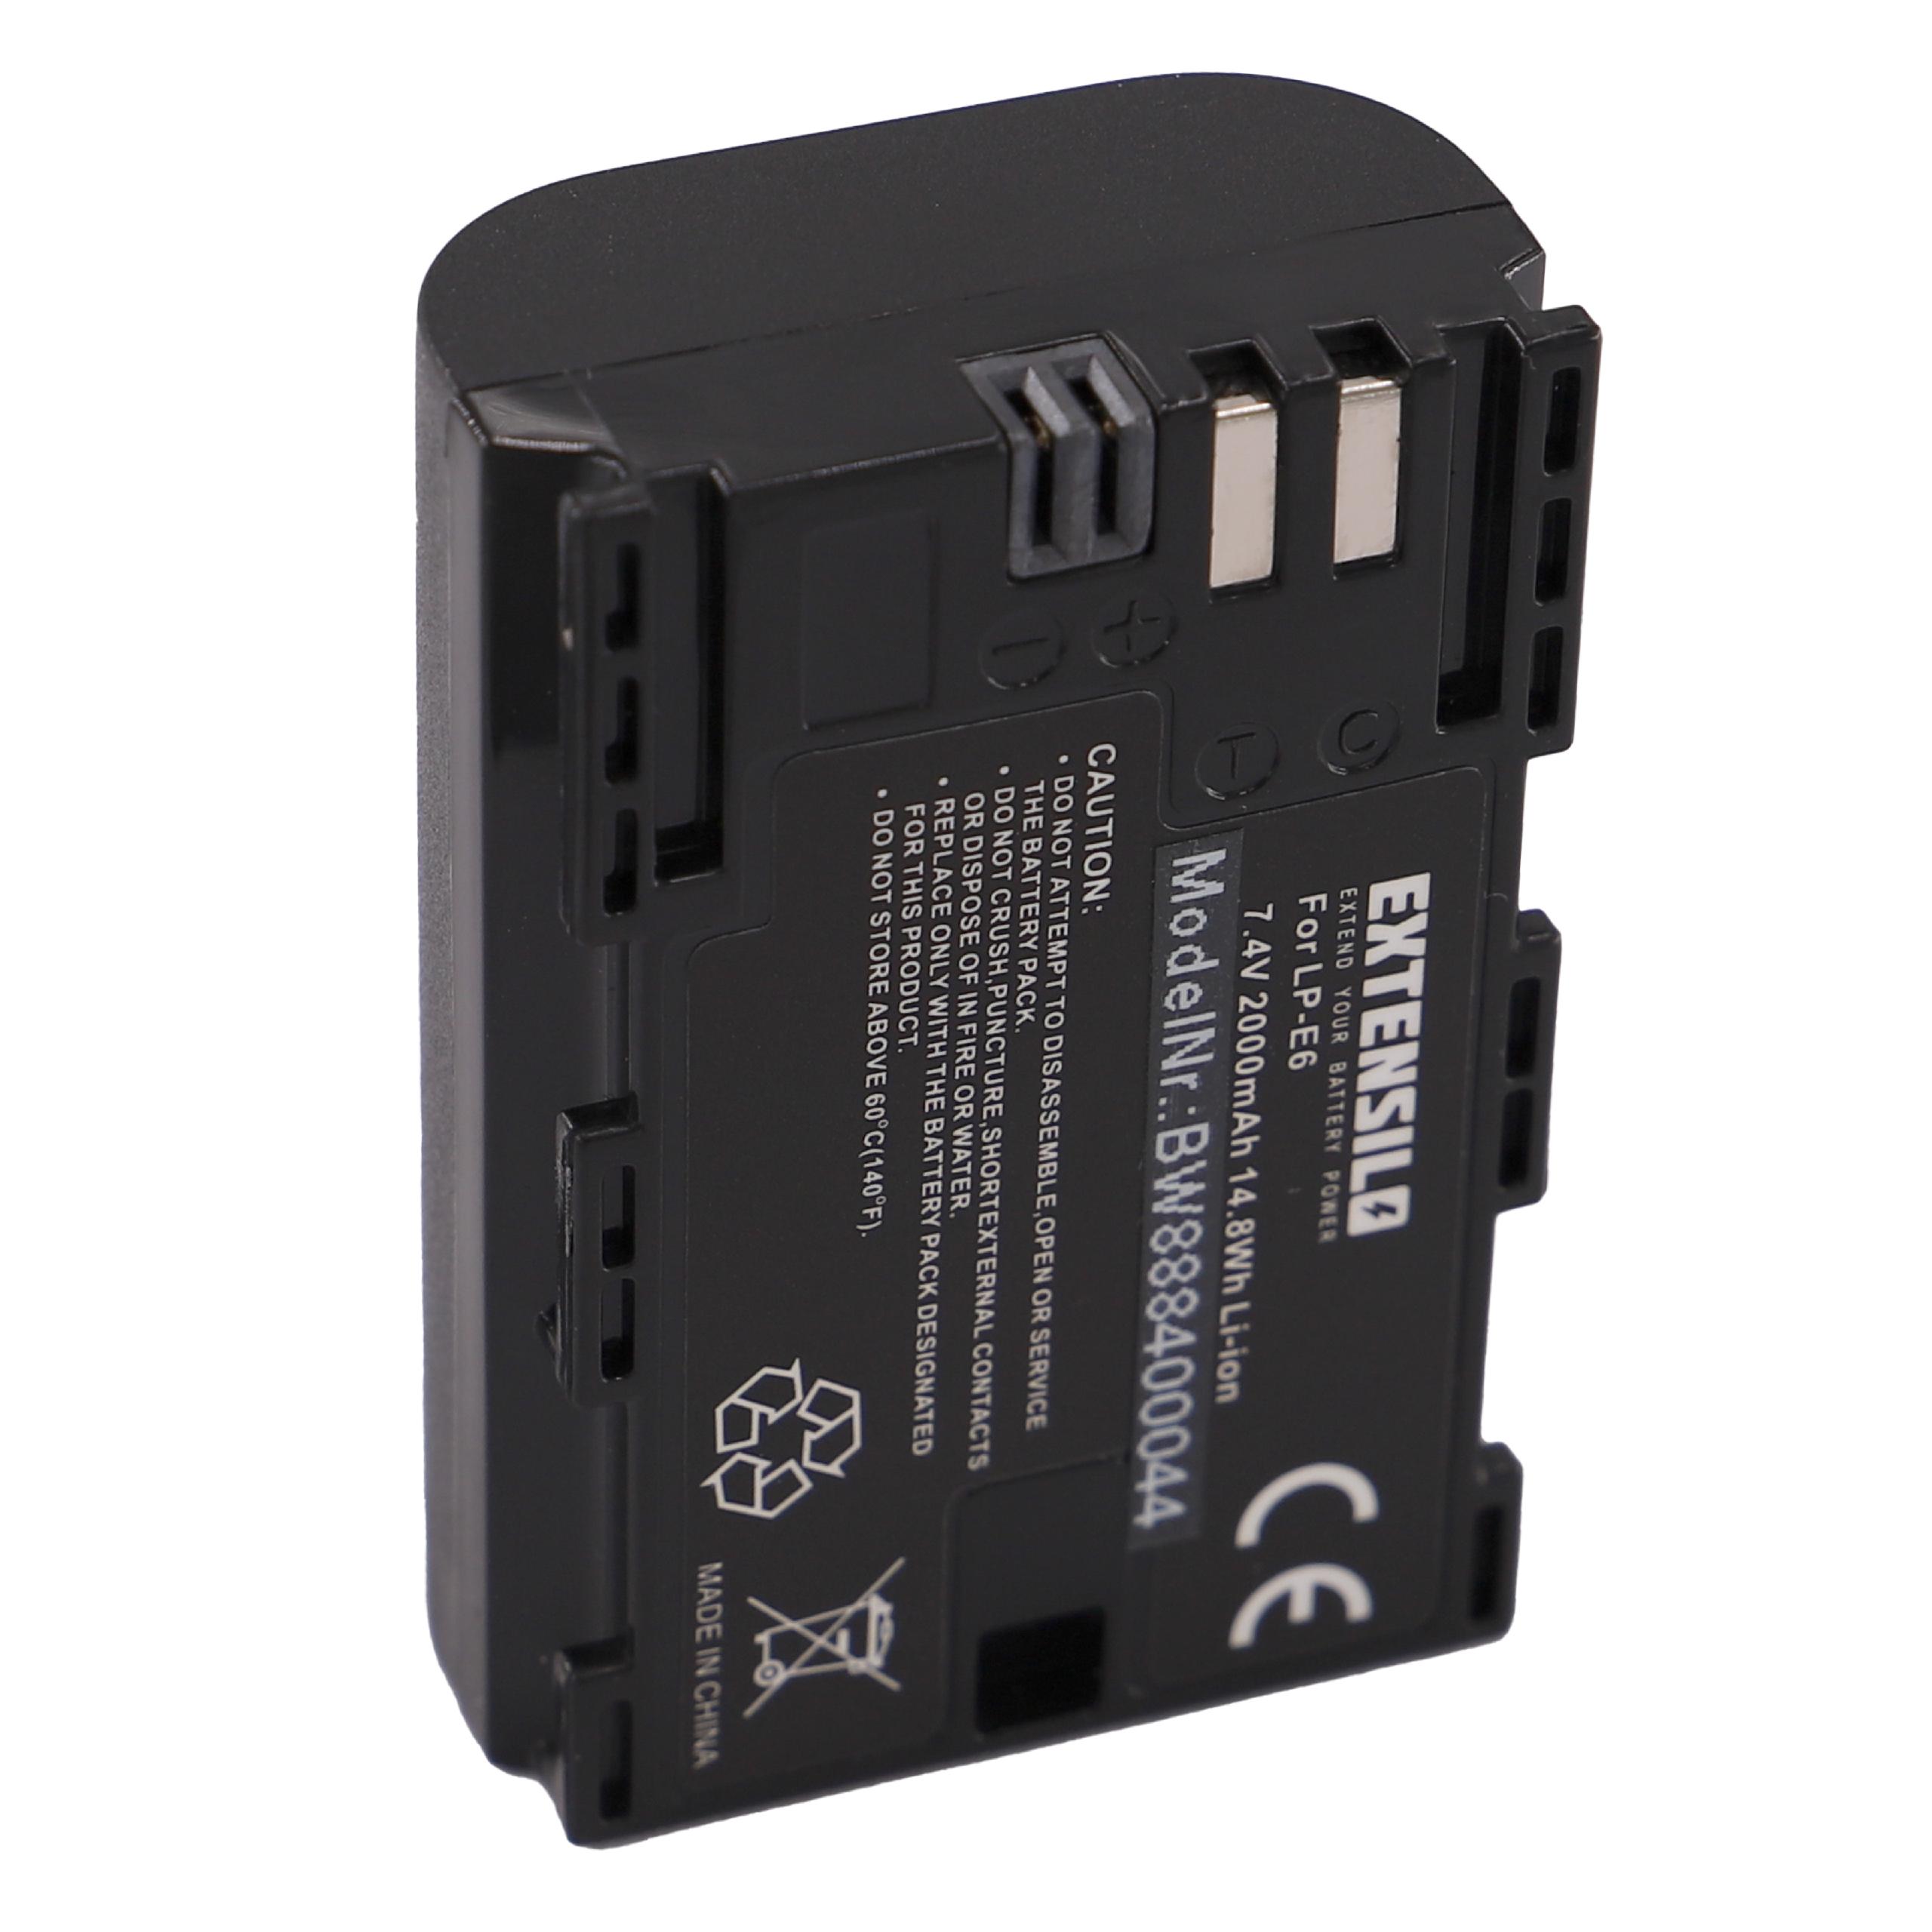 Battery Replacement for Canon LP-E6N - 2000mAh, 7.4V, Li-Ion